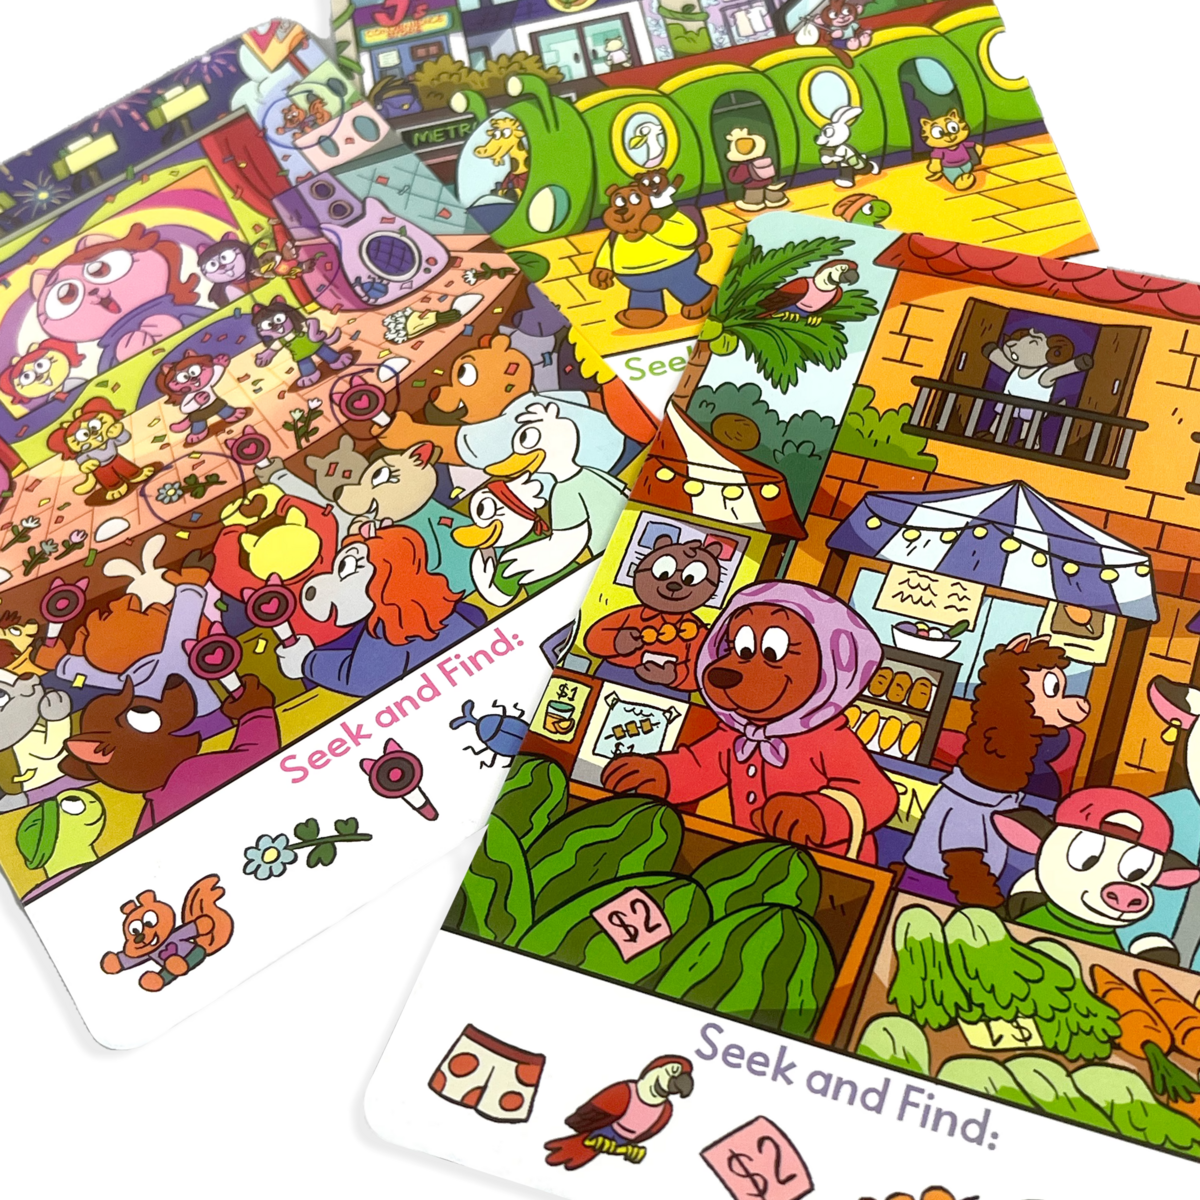 Seek and Find Paper Games activity card set close up